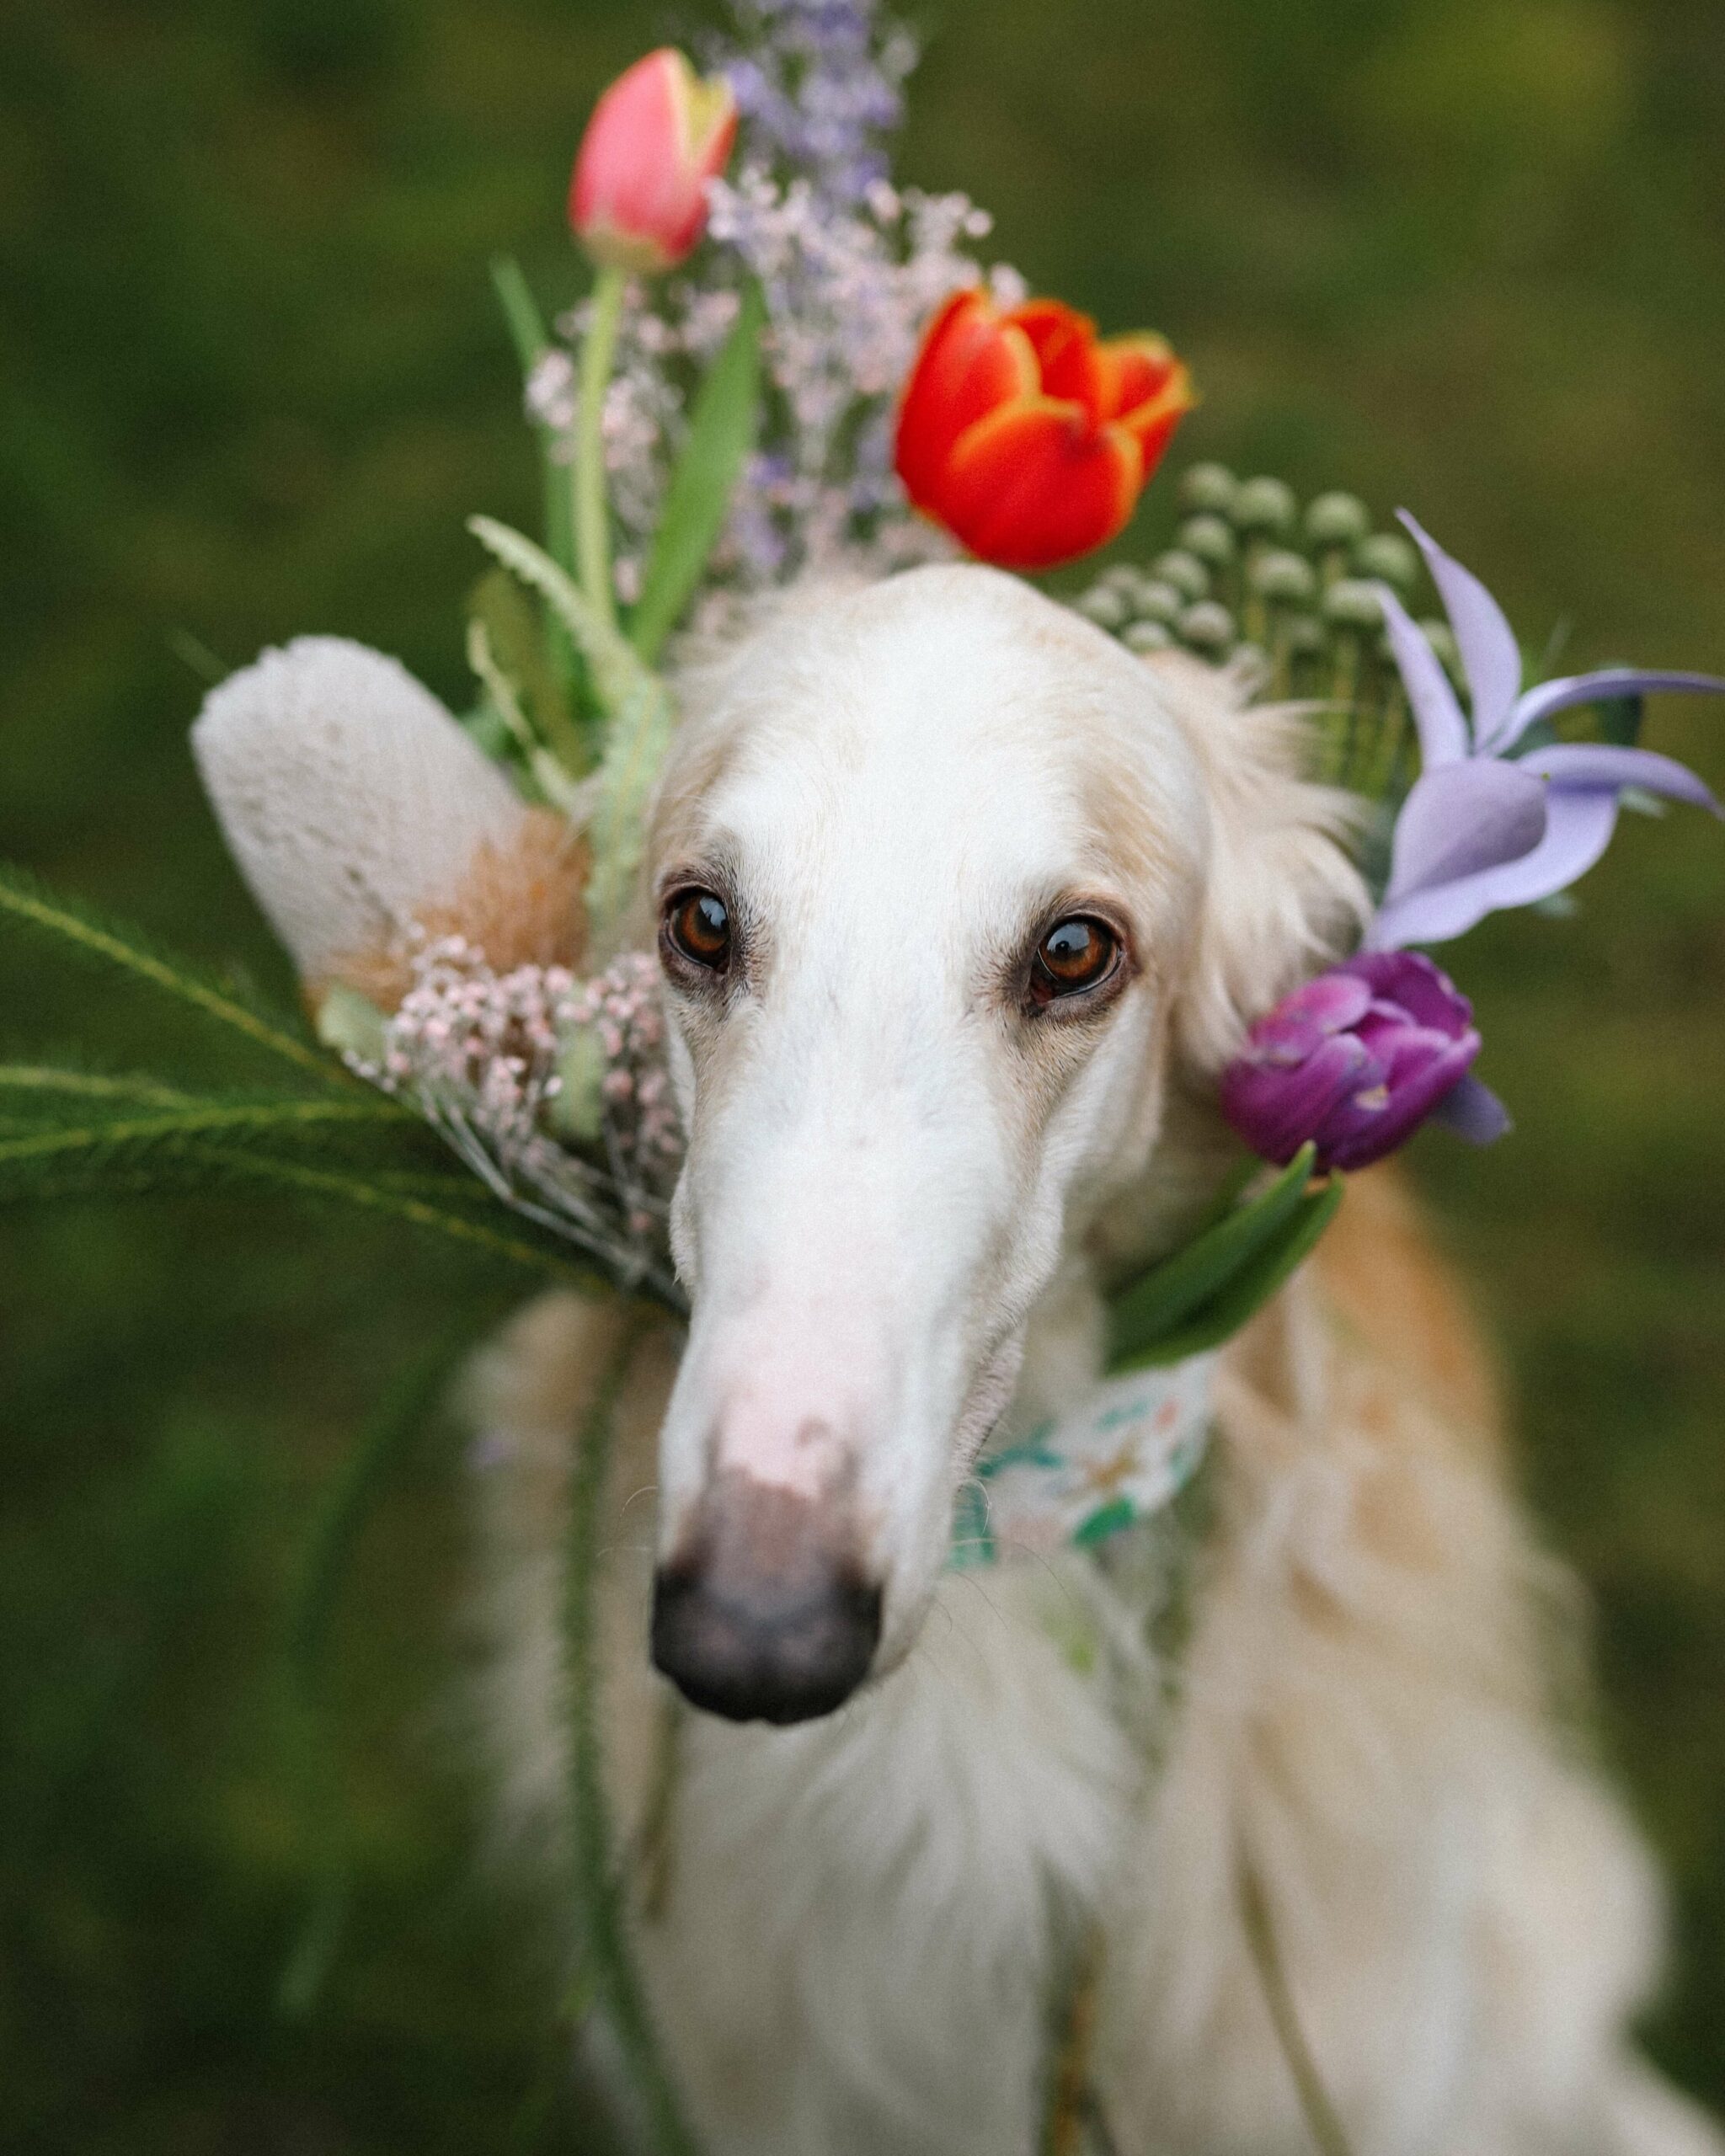 Can Borzoi live with small dogs